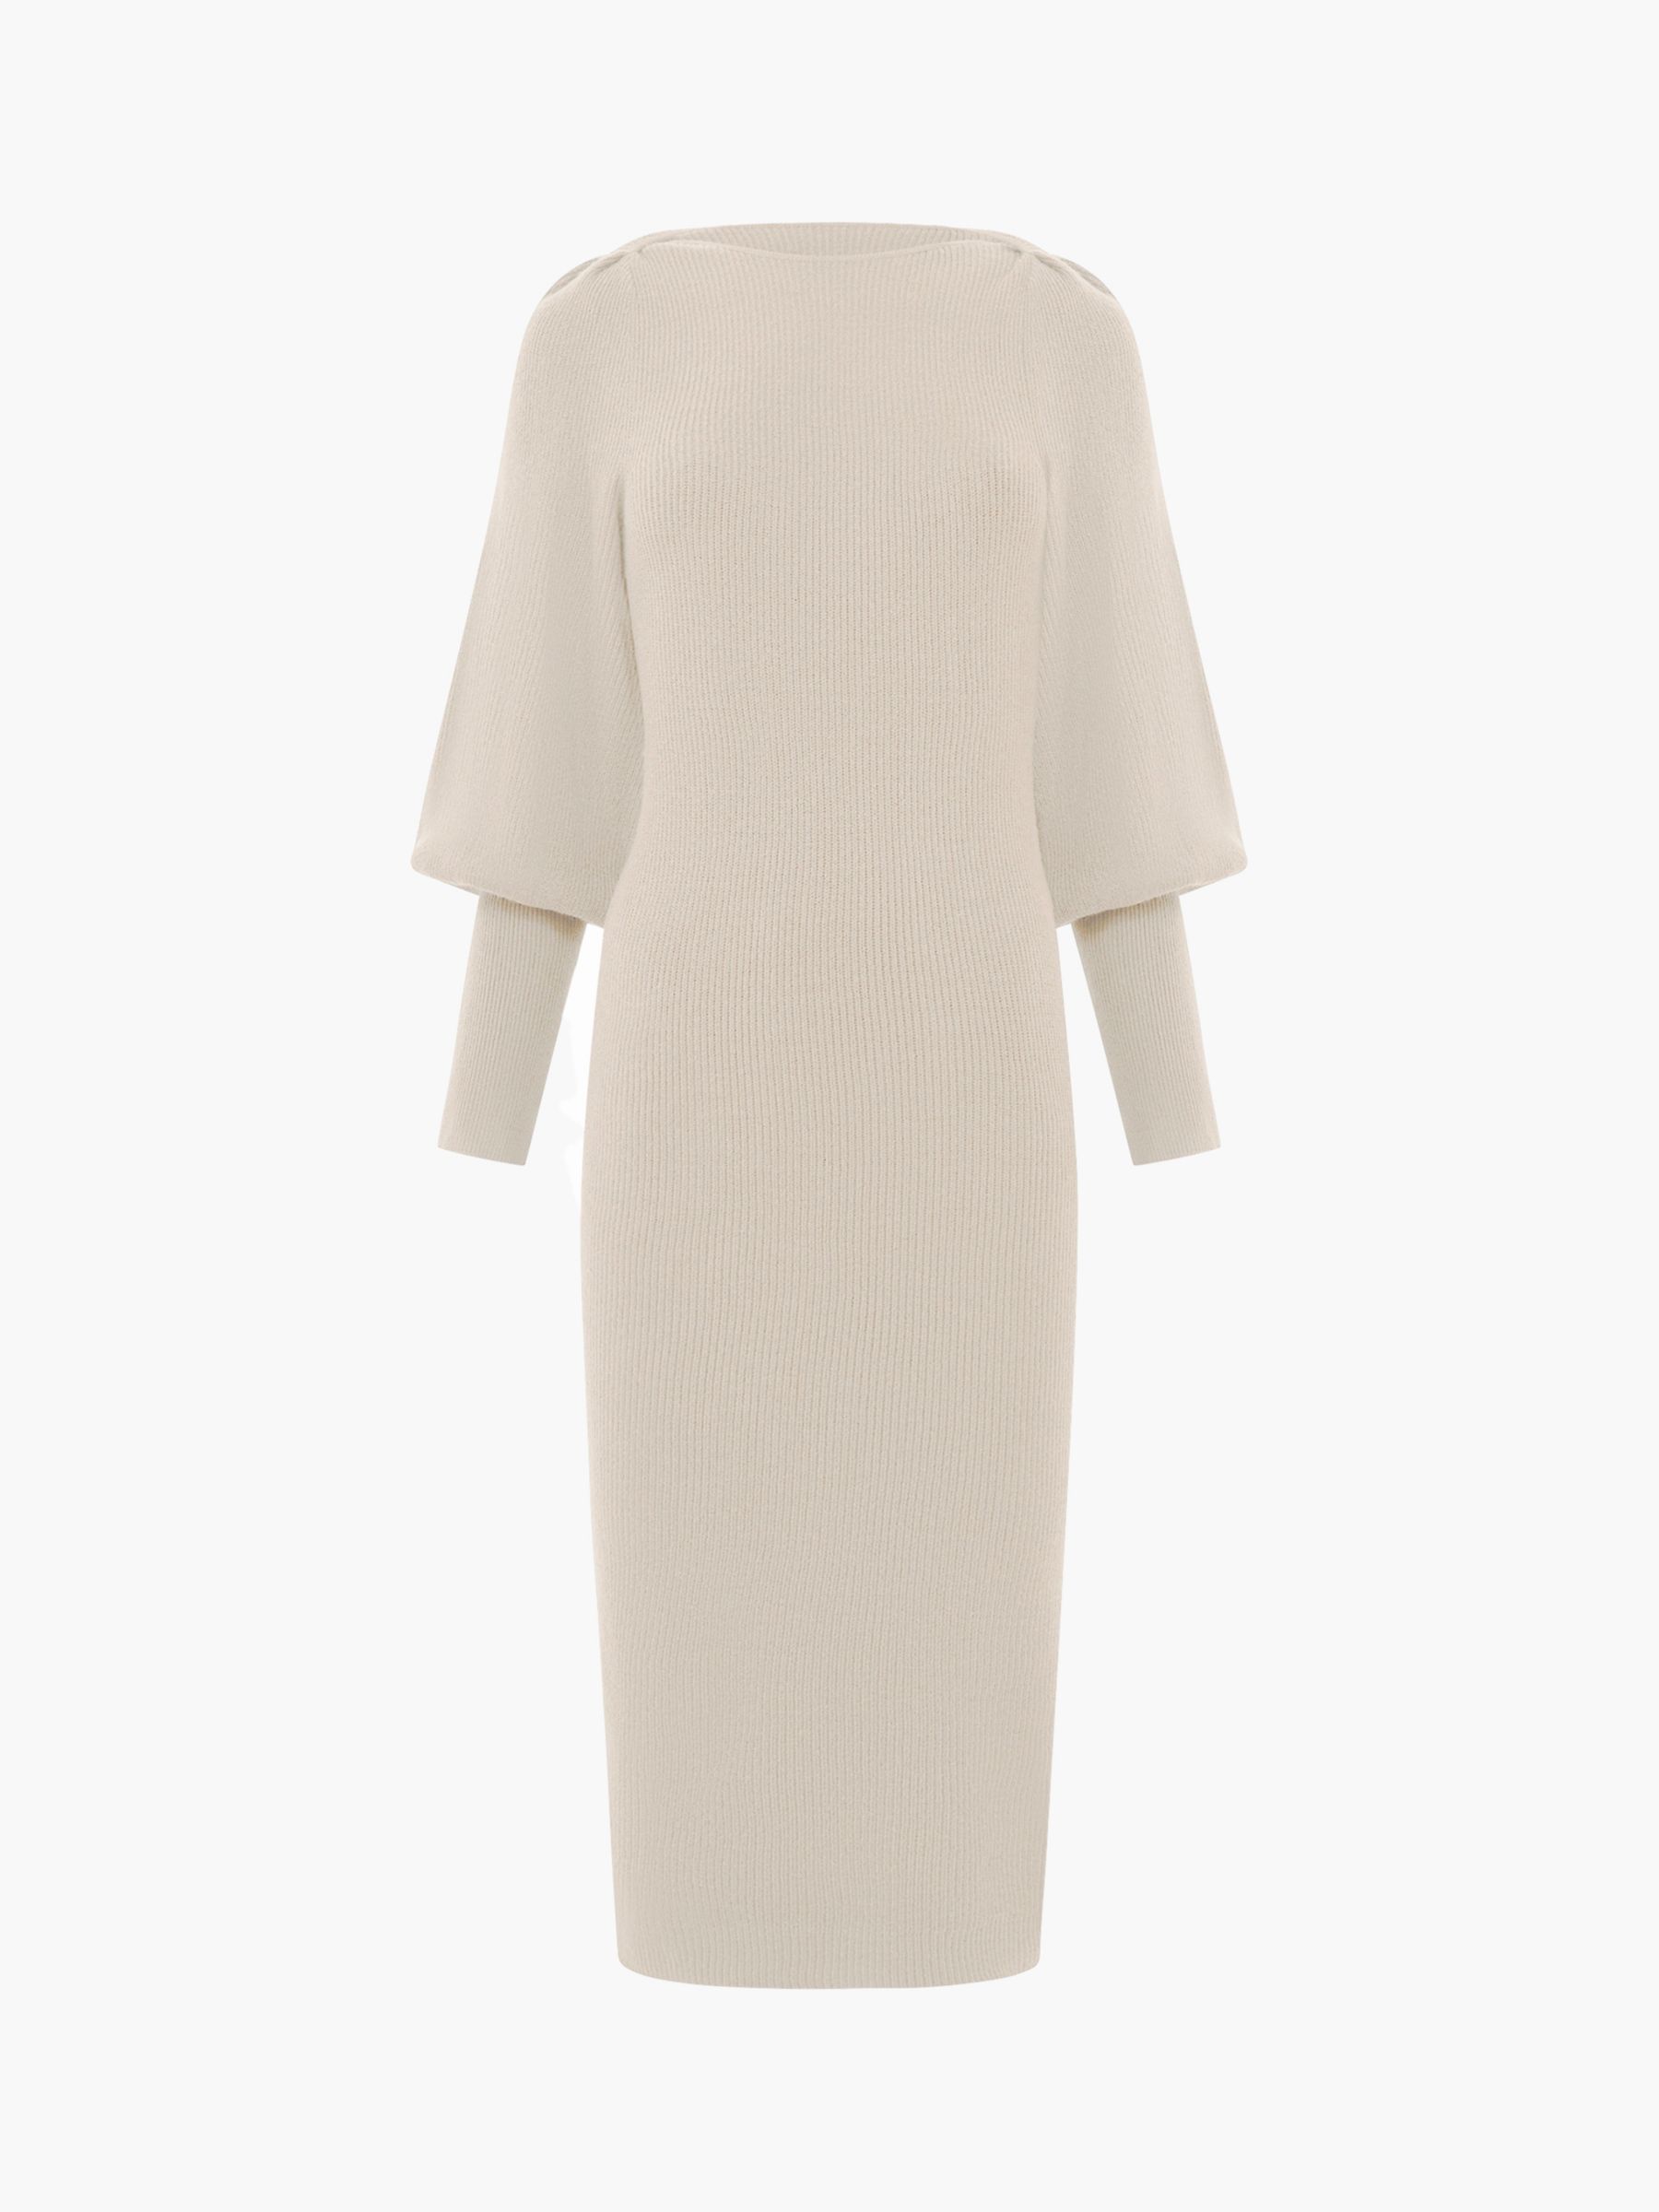 Buy French Connection Babysoft Joss Knit Dress, Classic Cream Online at johnlewis.com